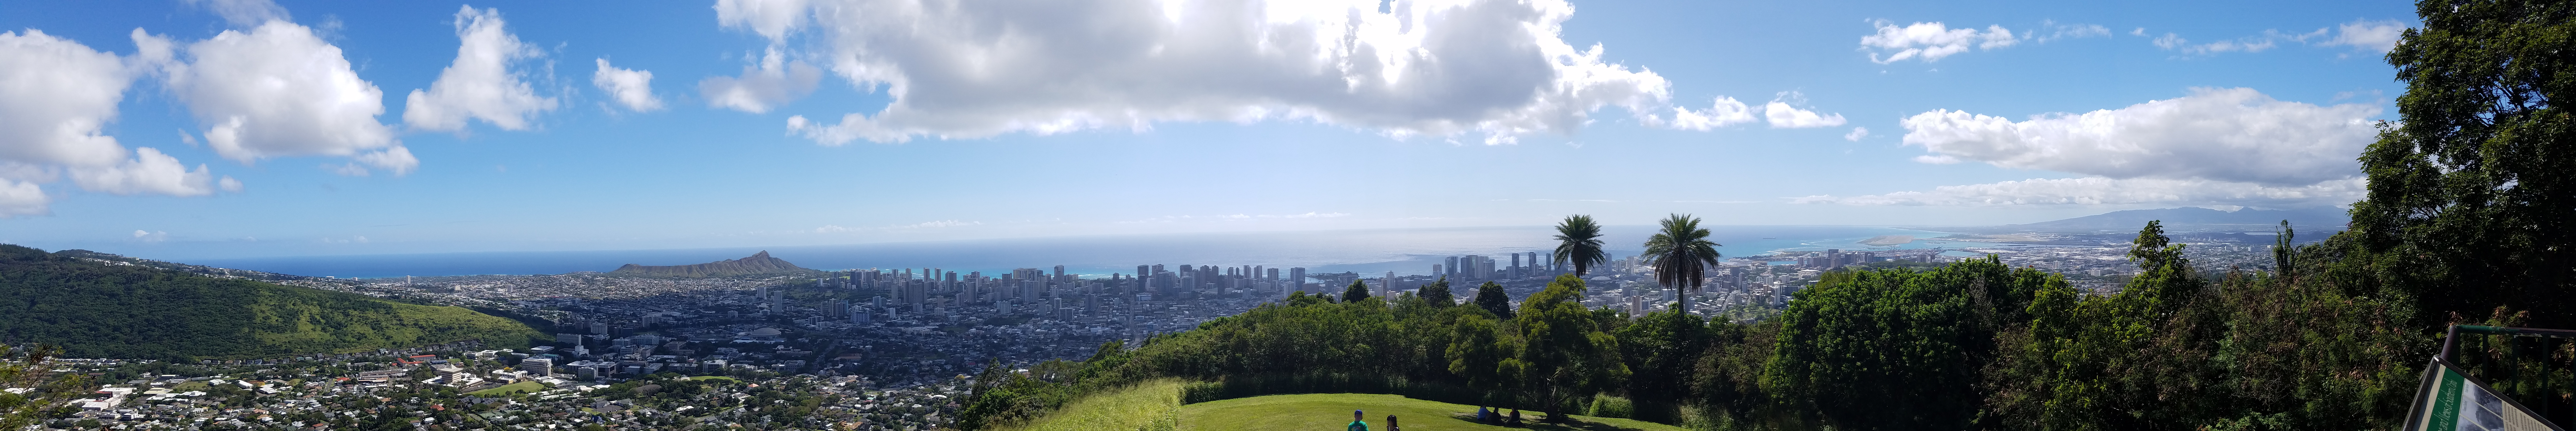 Honolulu from Tantalus Lookout